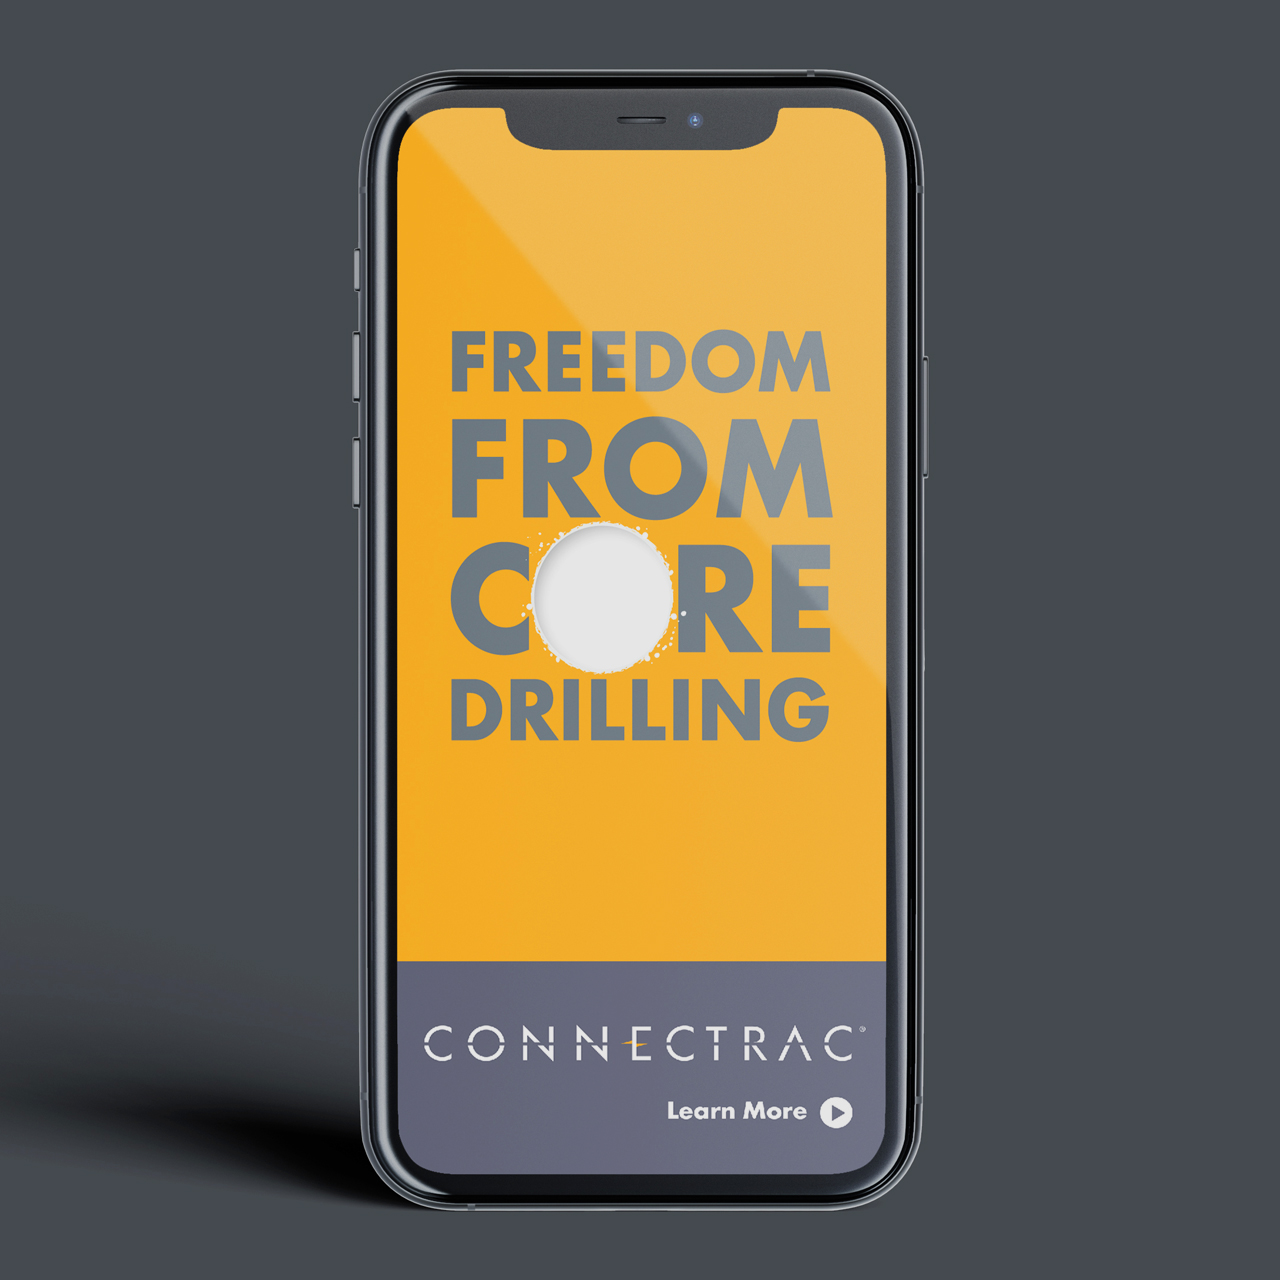 An image of a mobile phone with a digital ad design for Connectrac